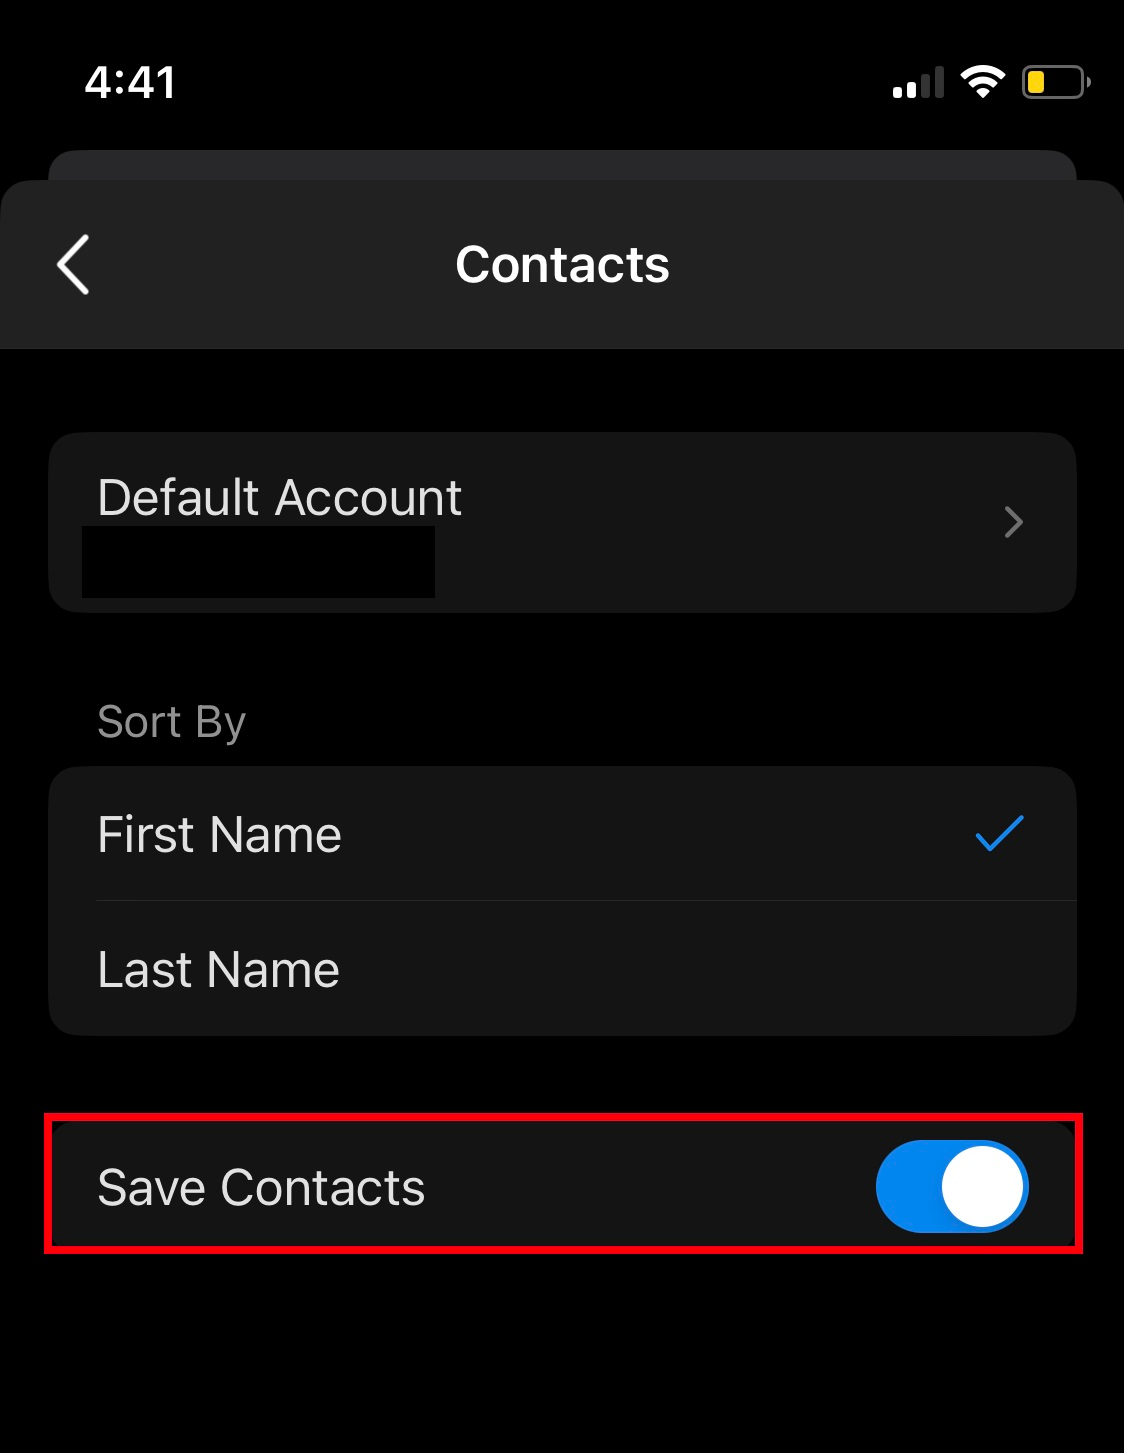 Enable 'Save Contacts